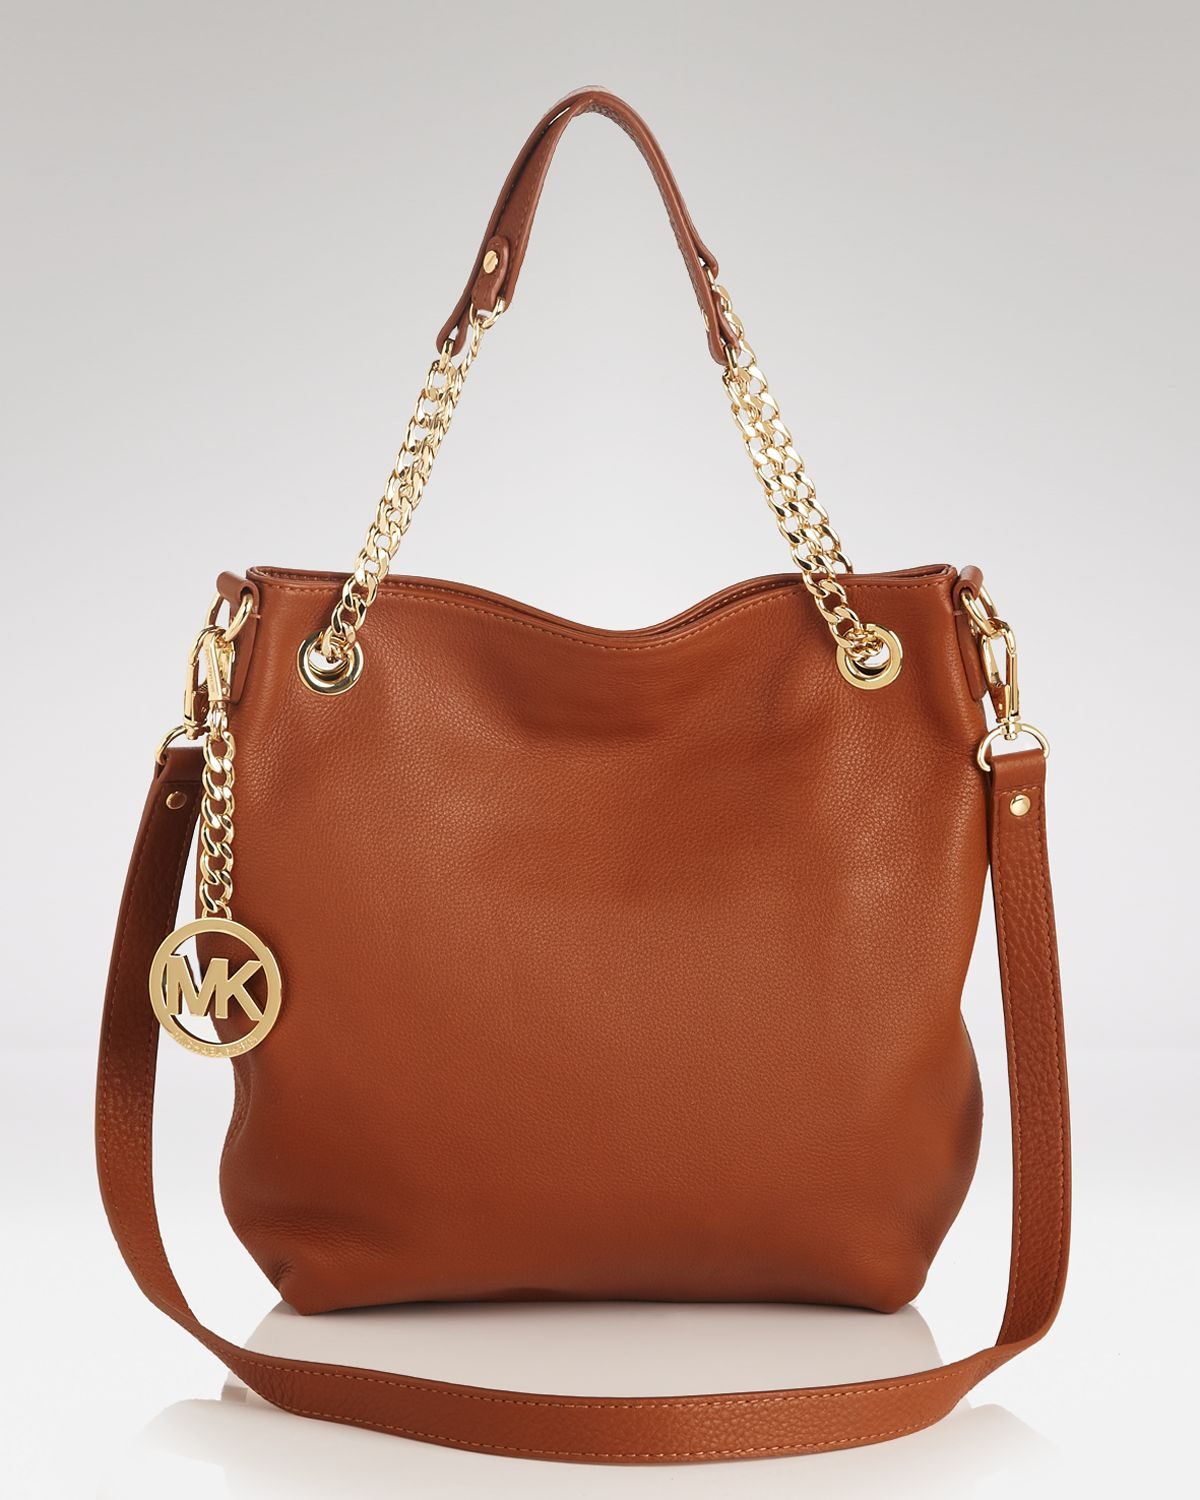 michael kors brown purse with gold chain